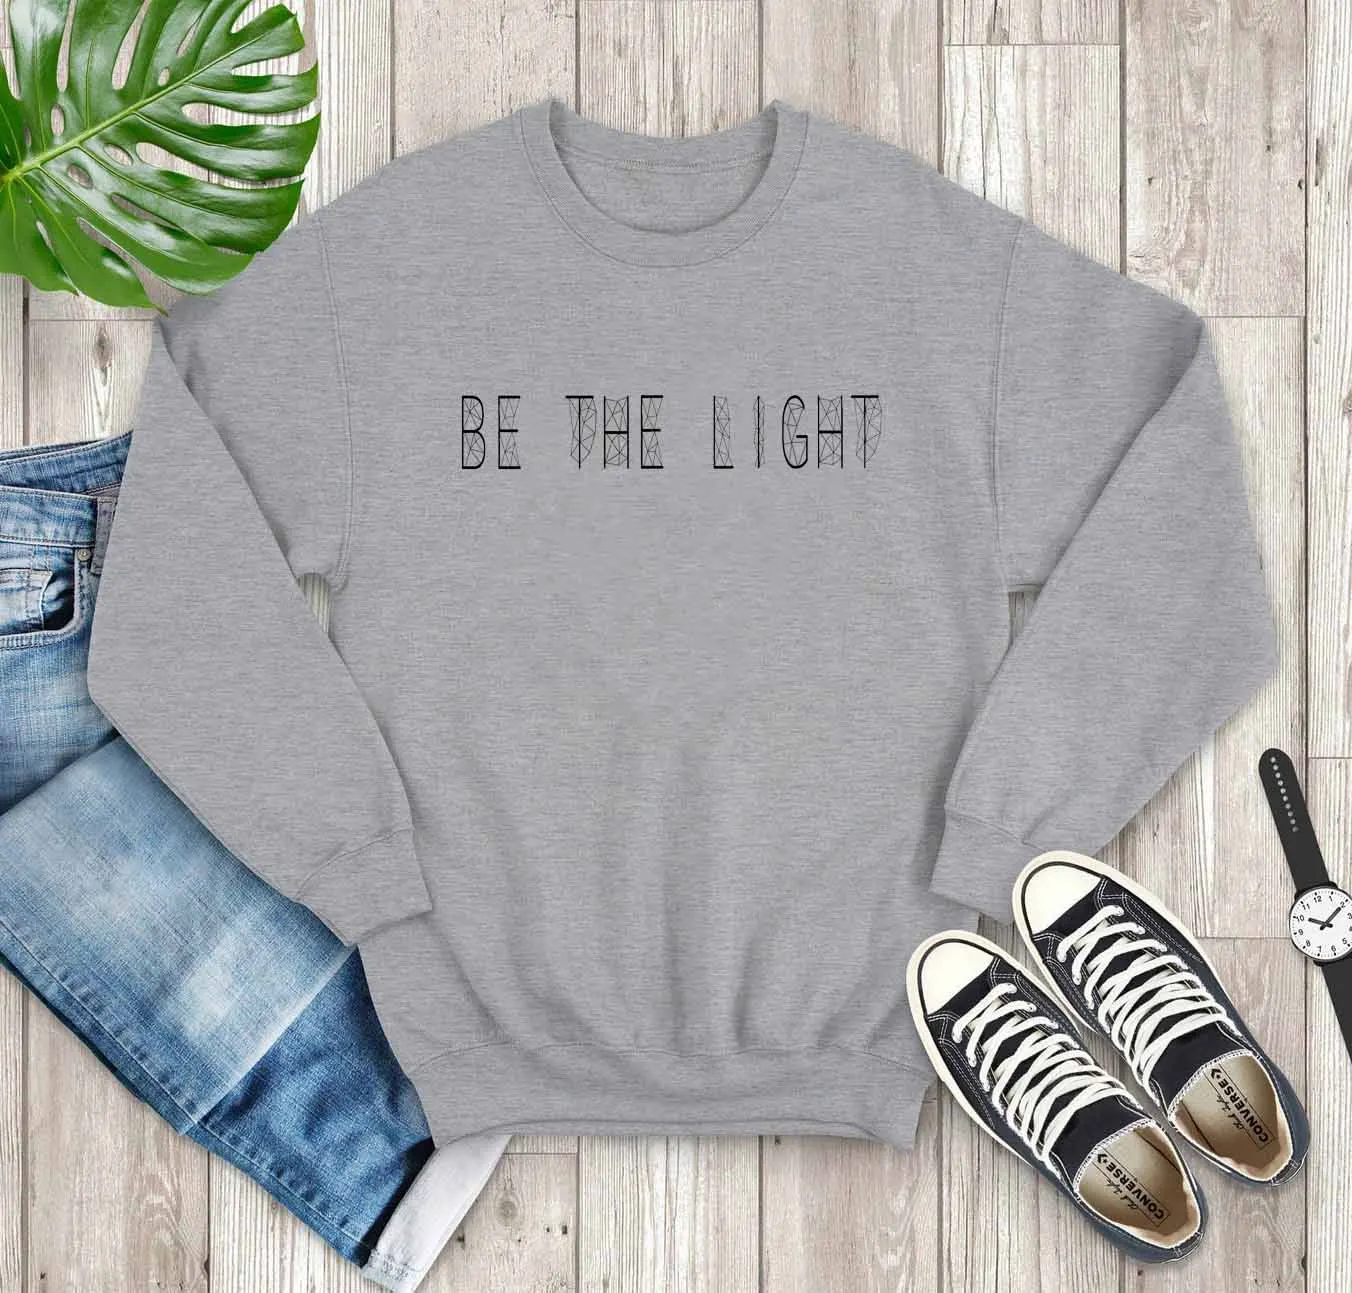 

Be The Light Sweatshirt Christian jesus women fashion unisex cotton winter autumn youngs hipster pullovers religion jesus tops